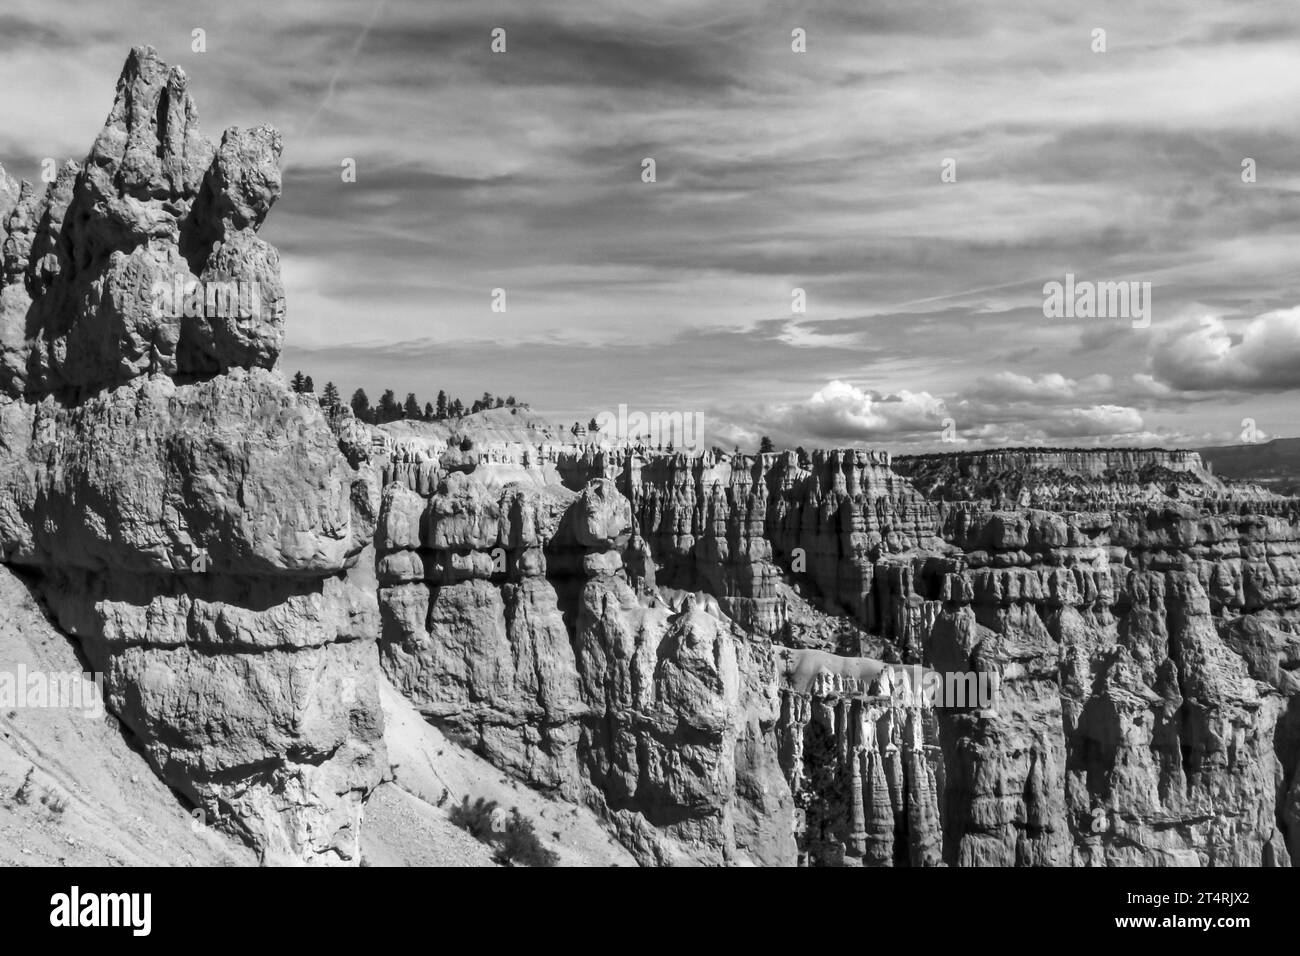 The rugged limestone Hoodoos of Bryce Canyon lining the edge of the Paunsaugunt Plateau, in Black and White Stock Photo